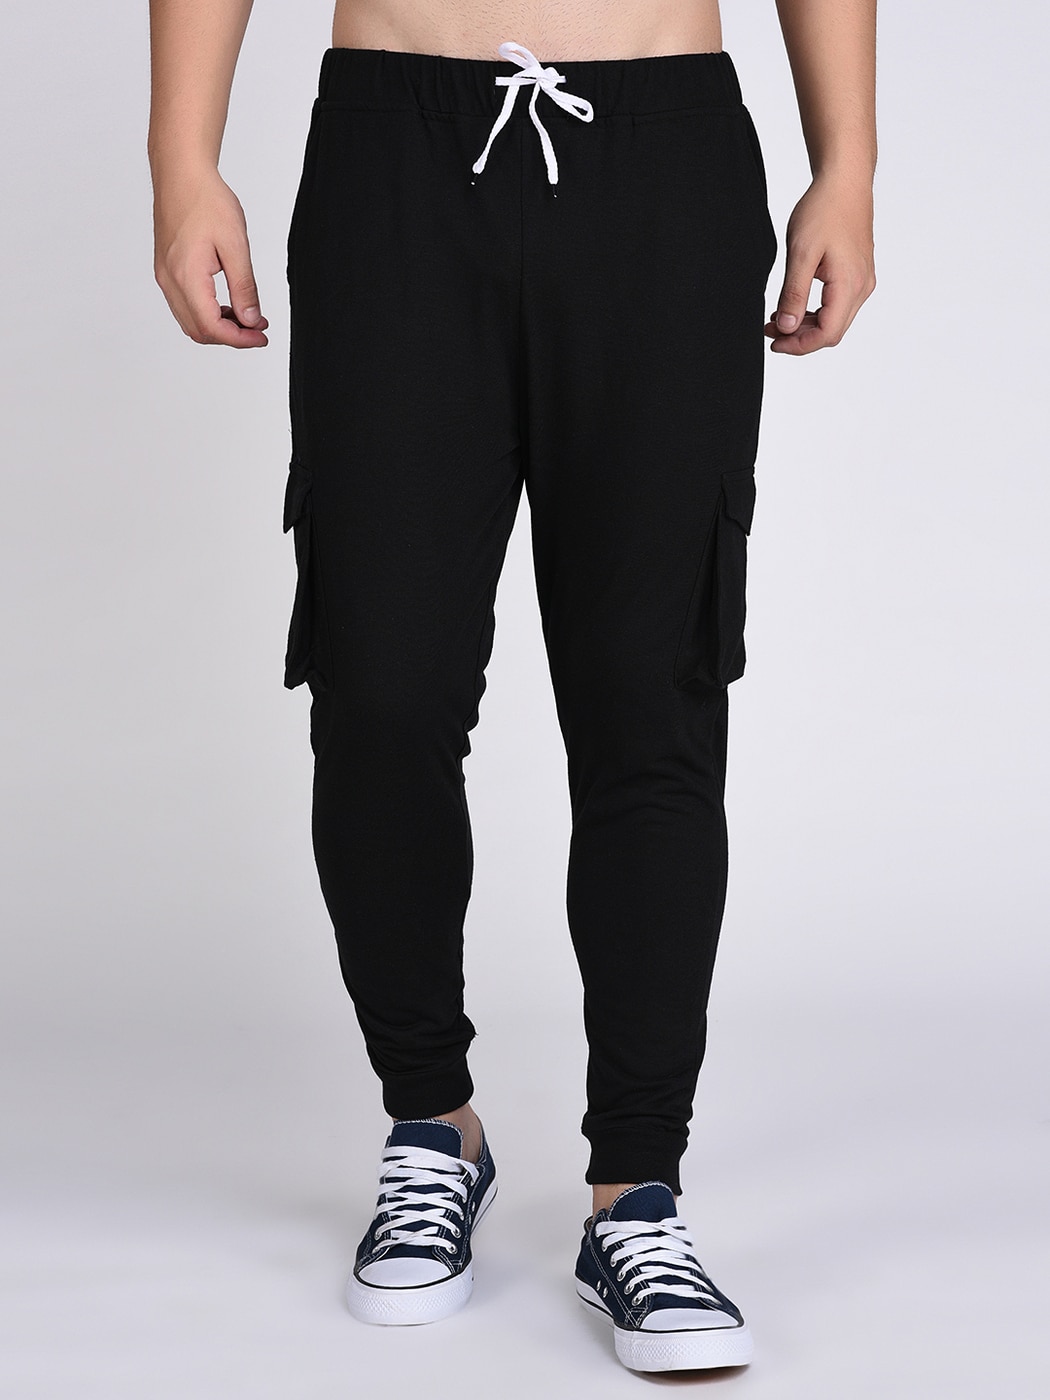 Buy Men Black Solid Jogger Fit Casual Trousers Online  703329  Peter  England